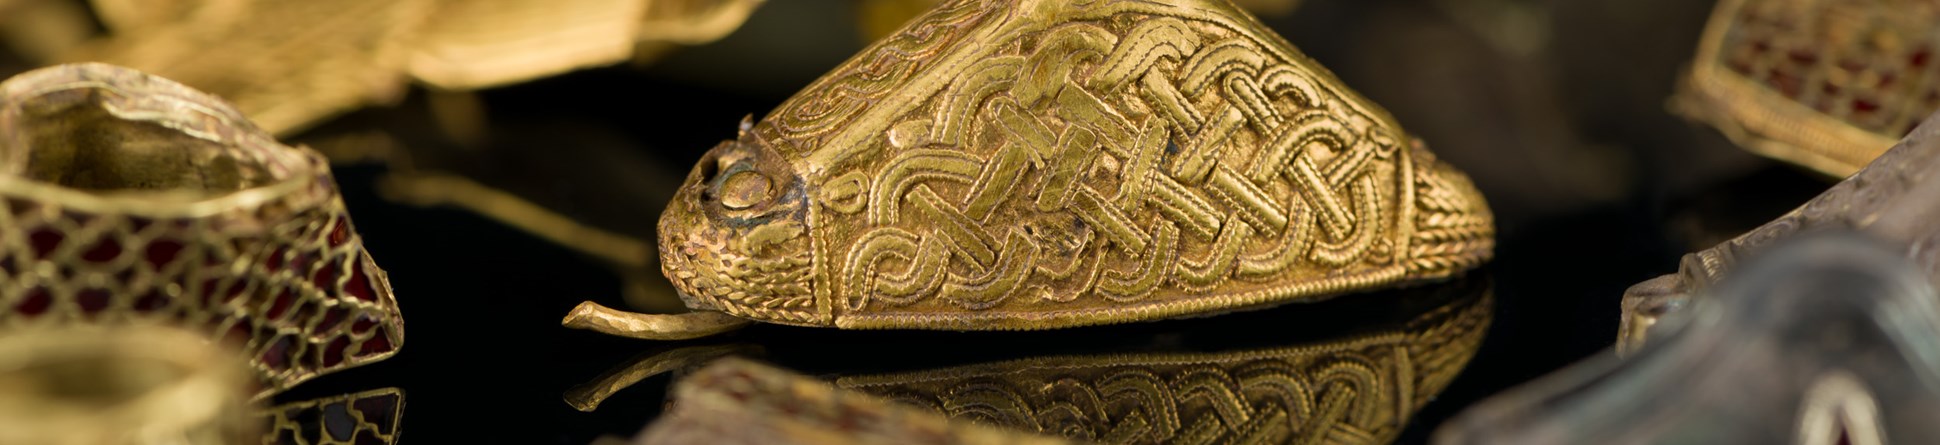 Detail of a group of decorated gold objects.